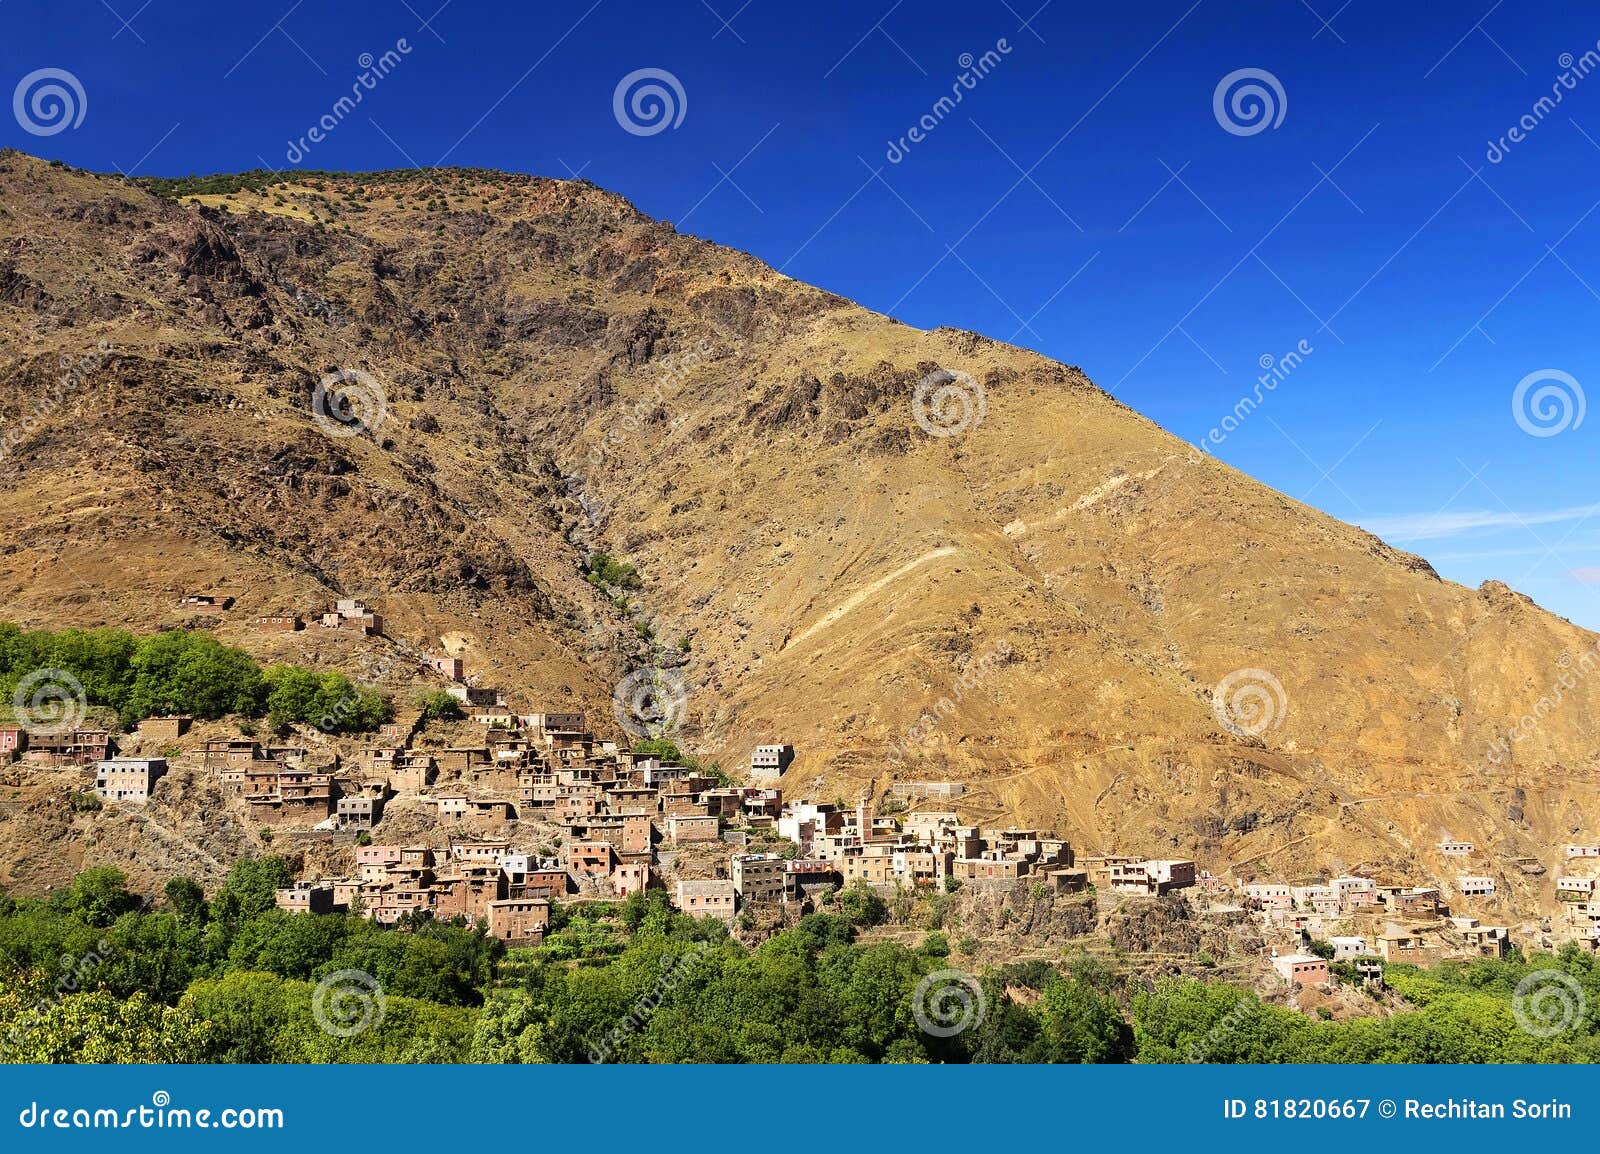 moroccan village in the anti-atlas mountains